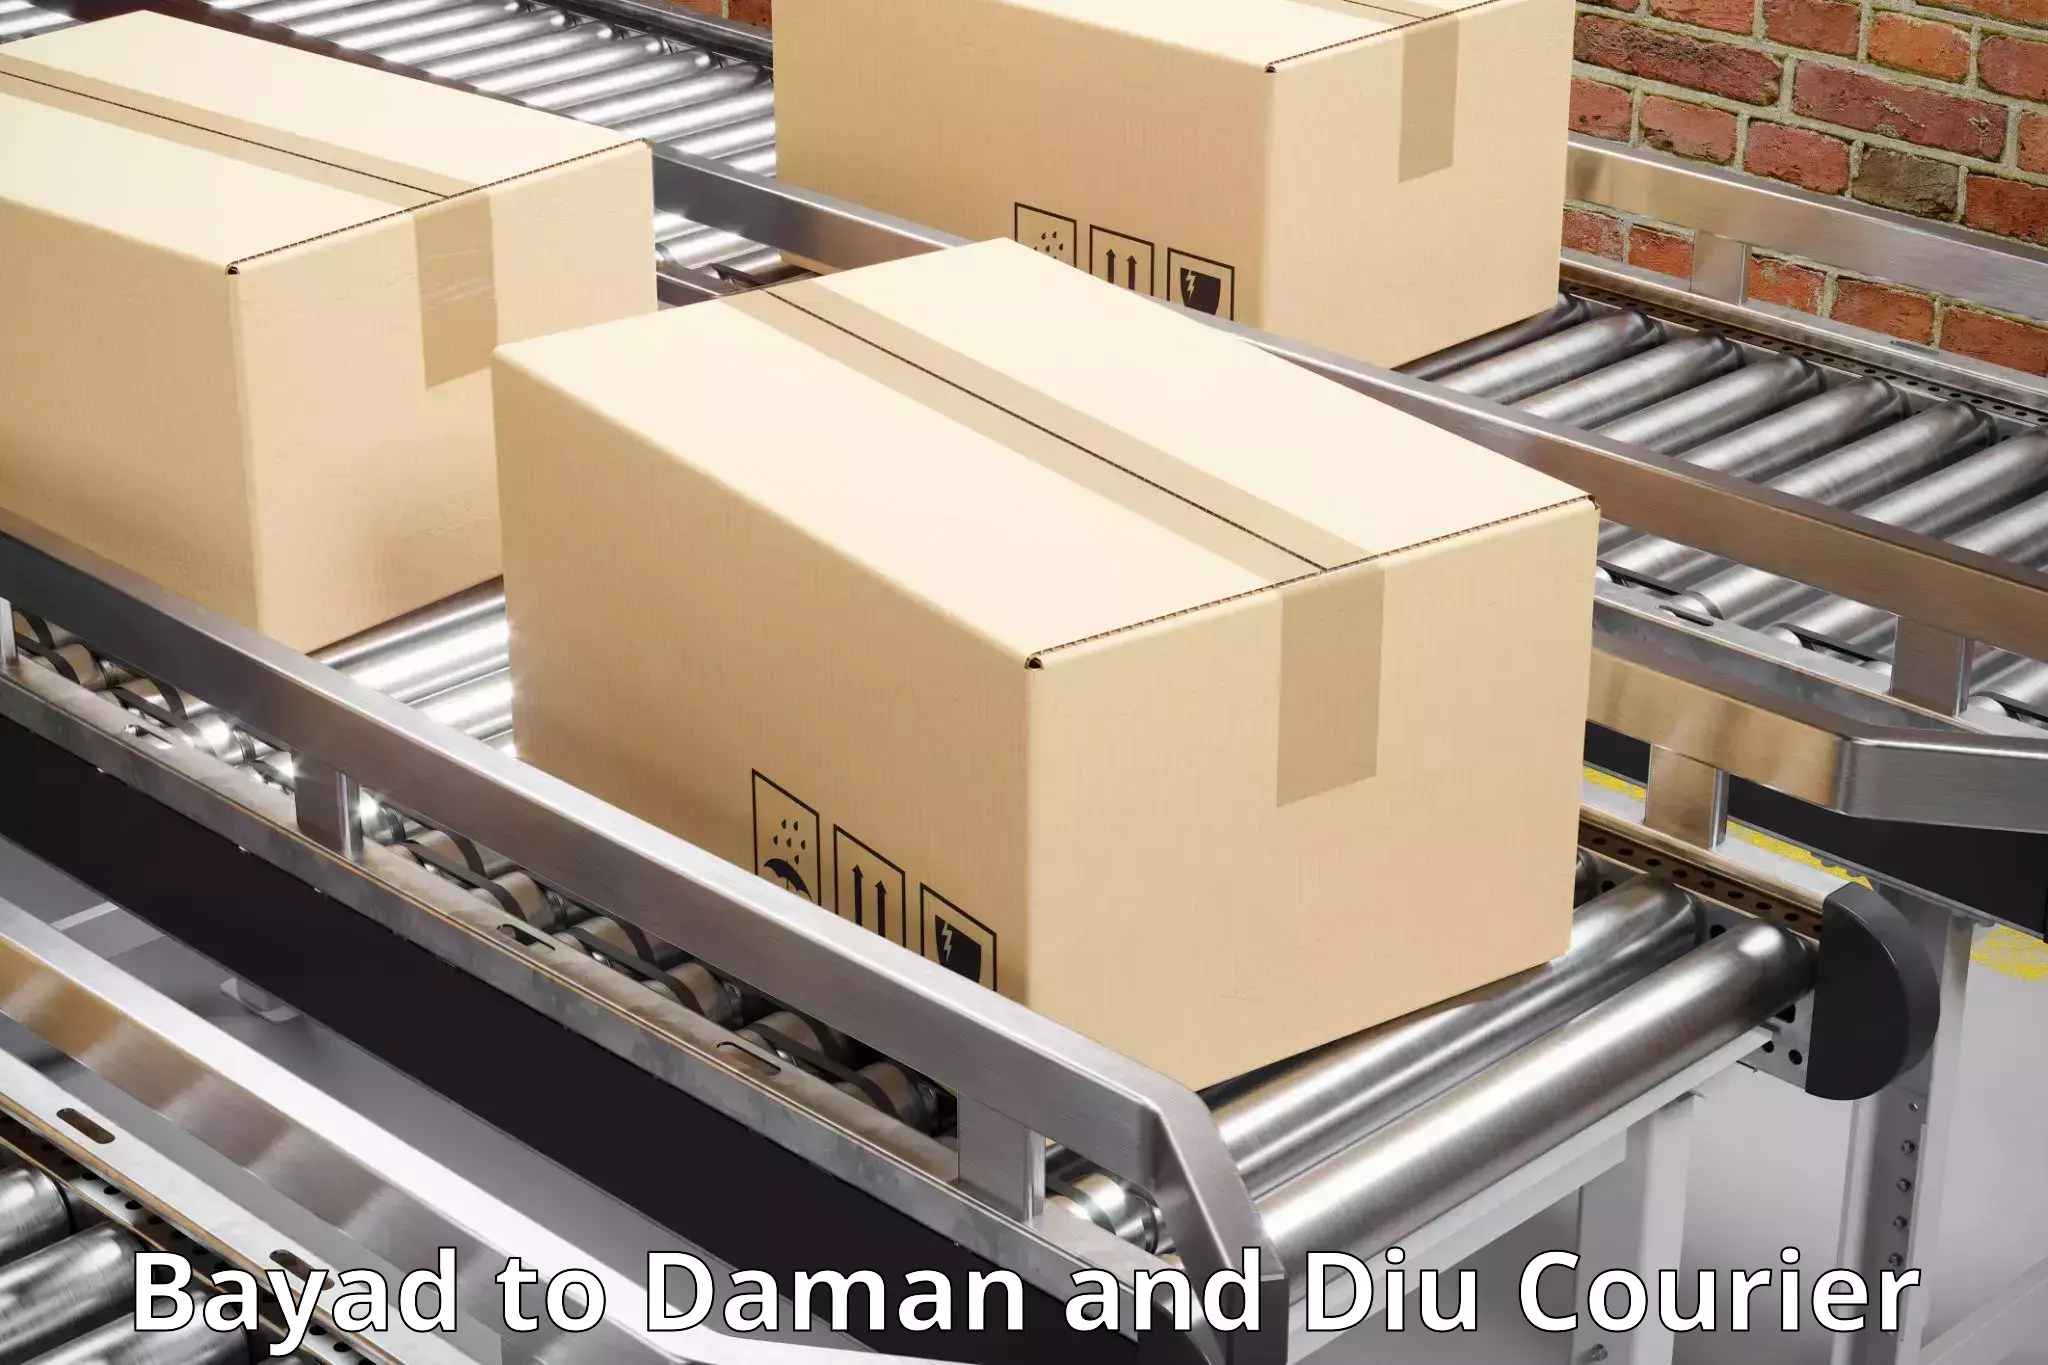 Cost-effective courier options Bayad to Daman and Diu